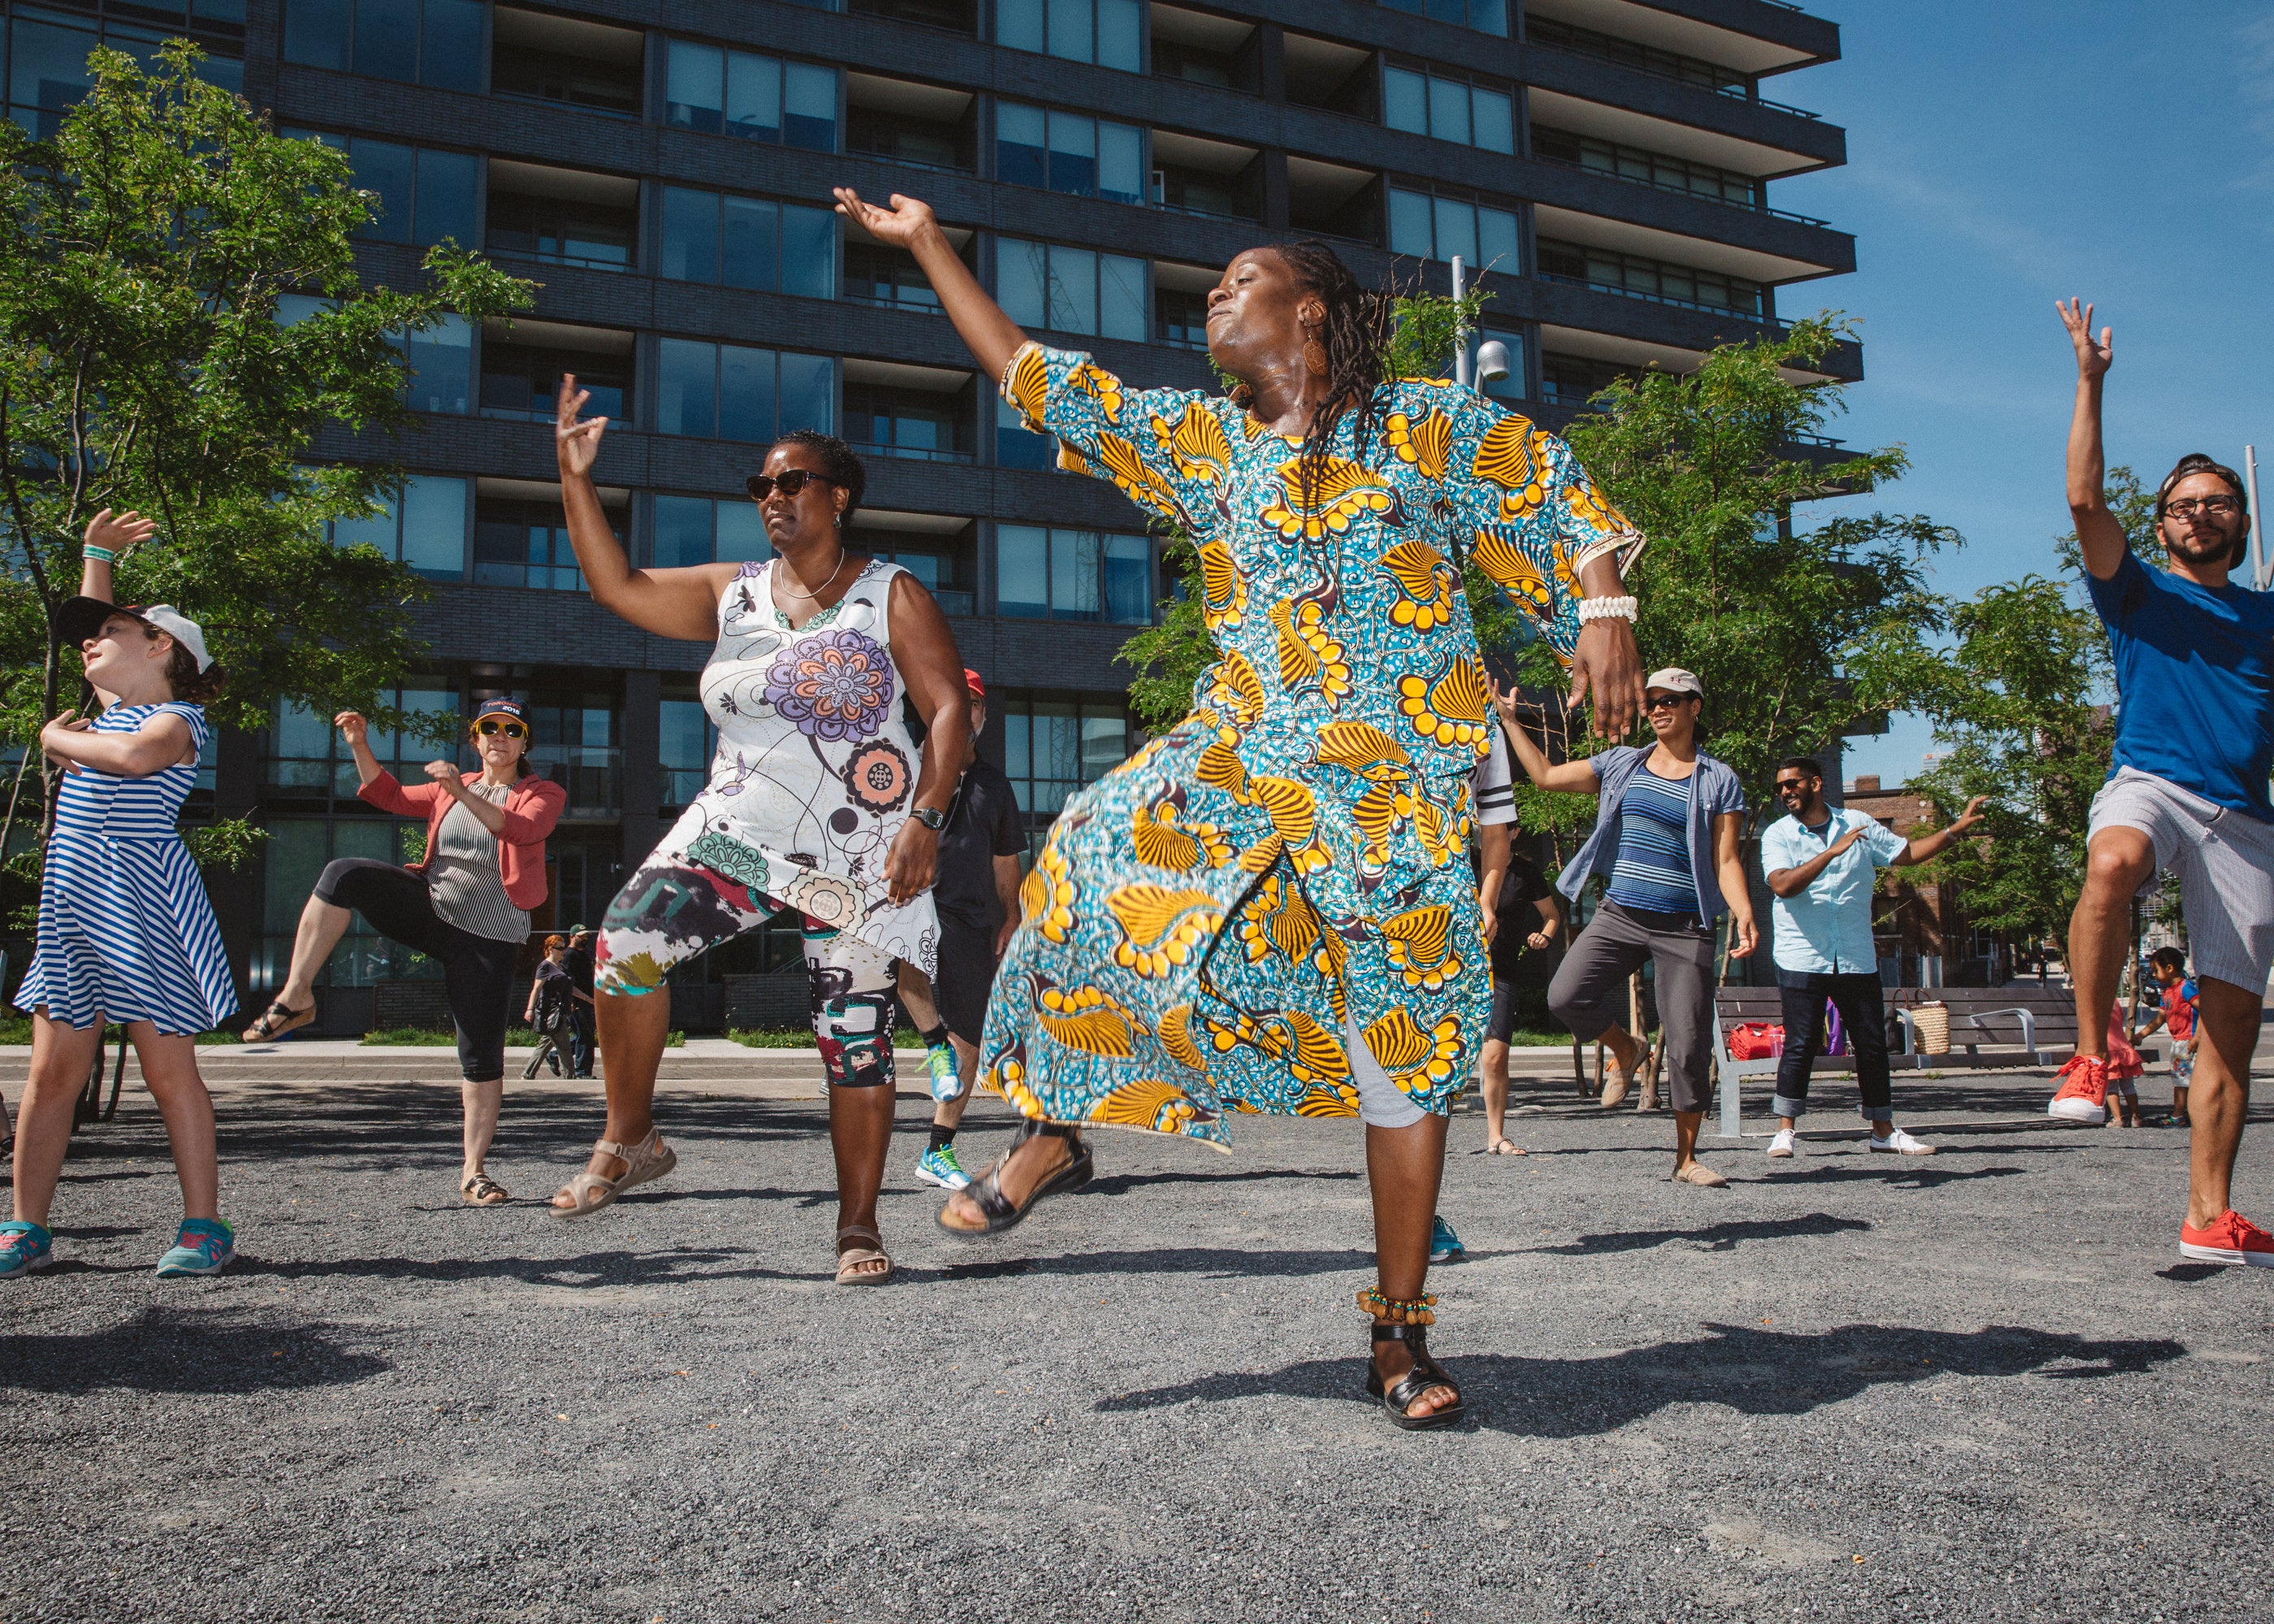 Community members at Lawren Harris Square learning the West African Dance from Miss Coco.